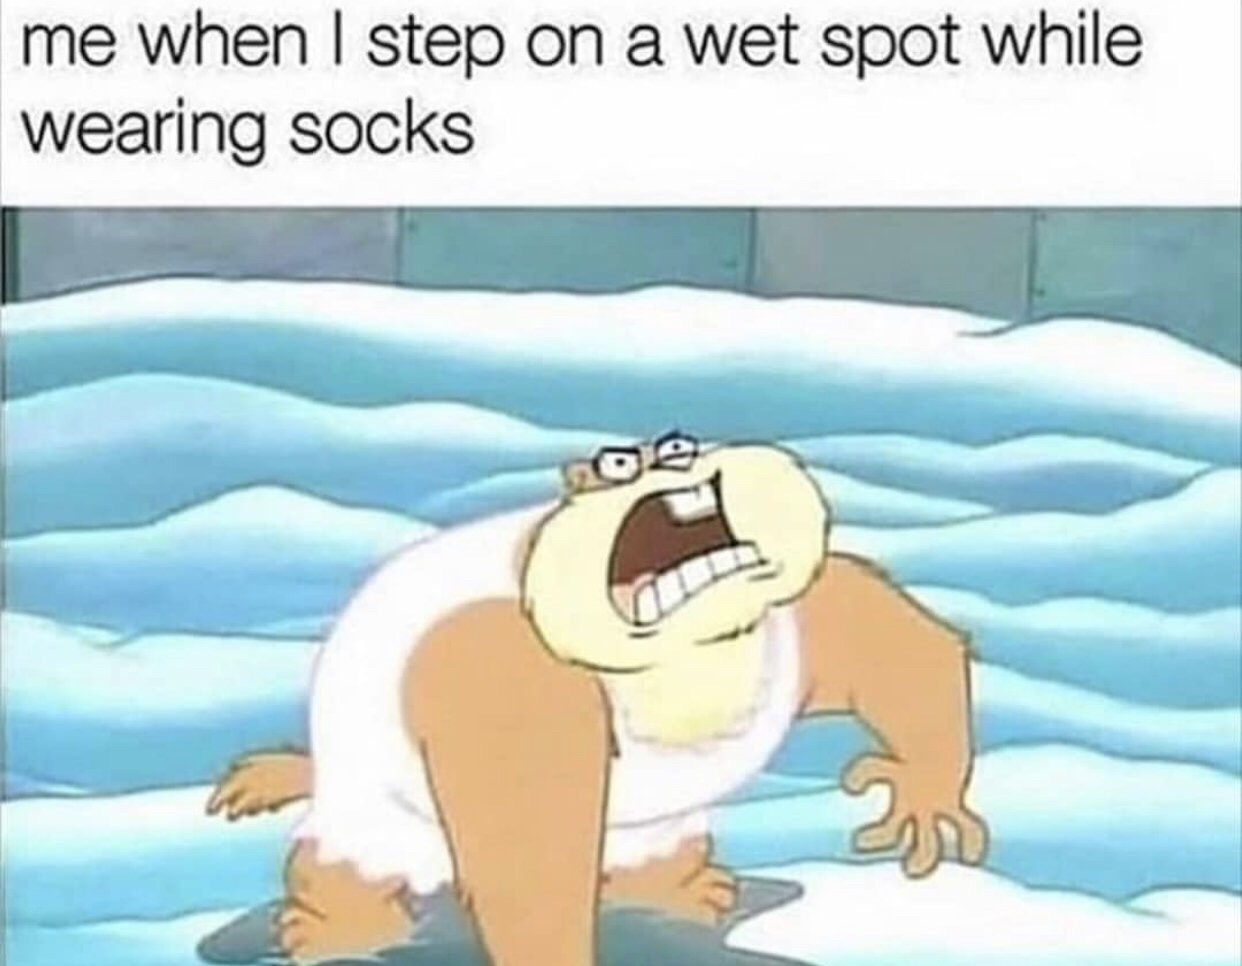 am dirty dan - me when I step on a wet spot while wearing socks